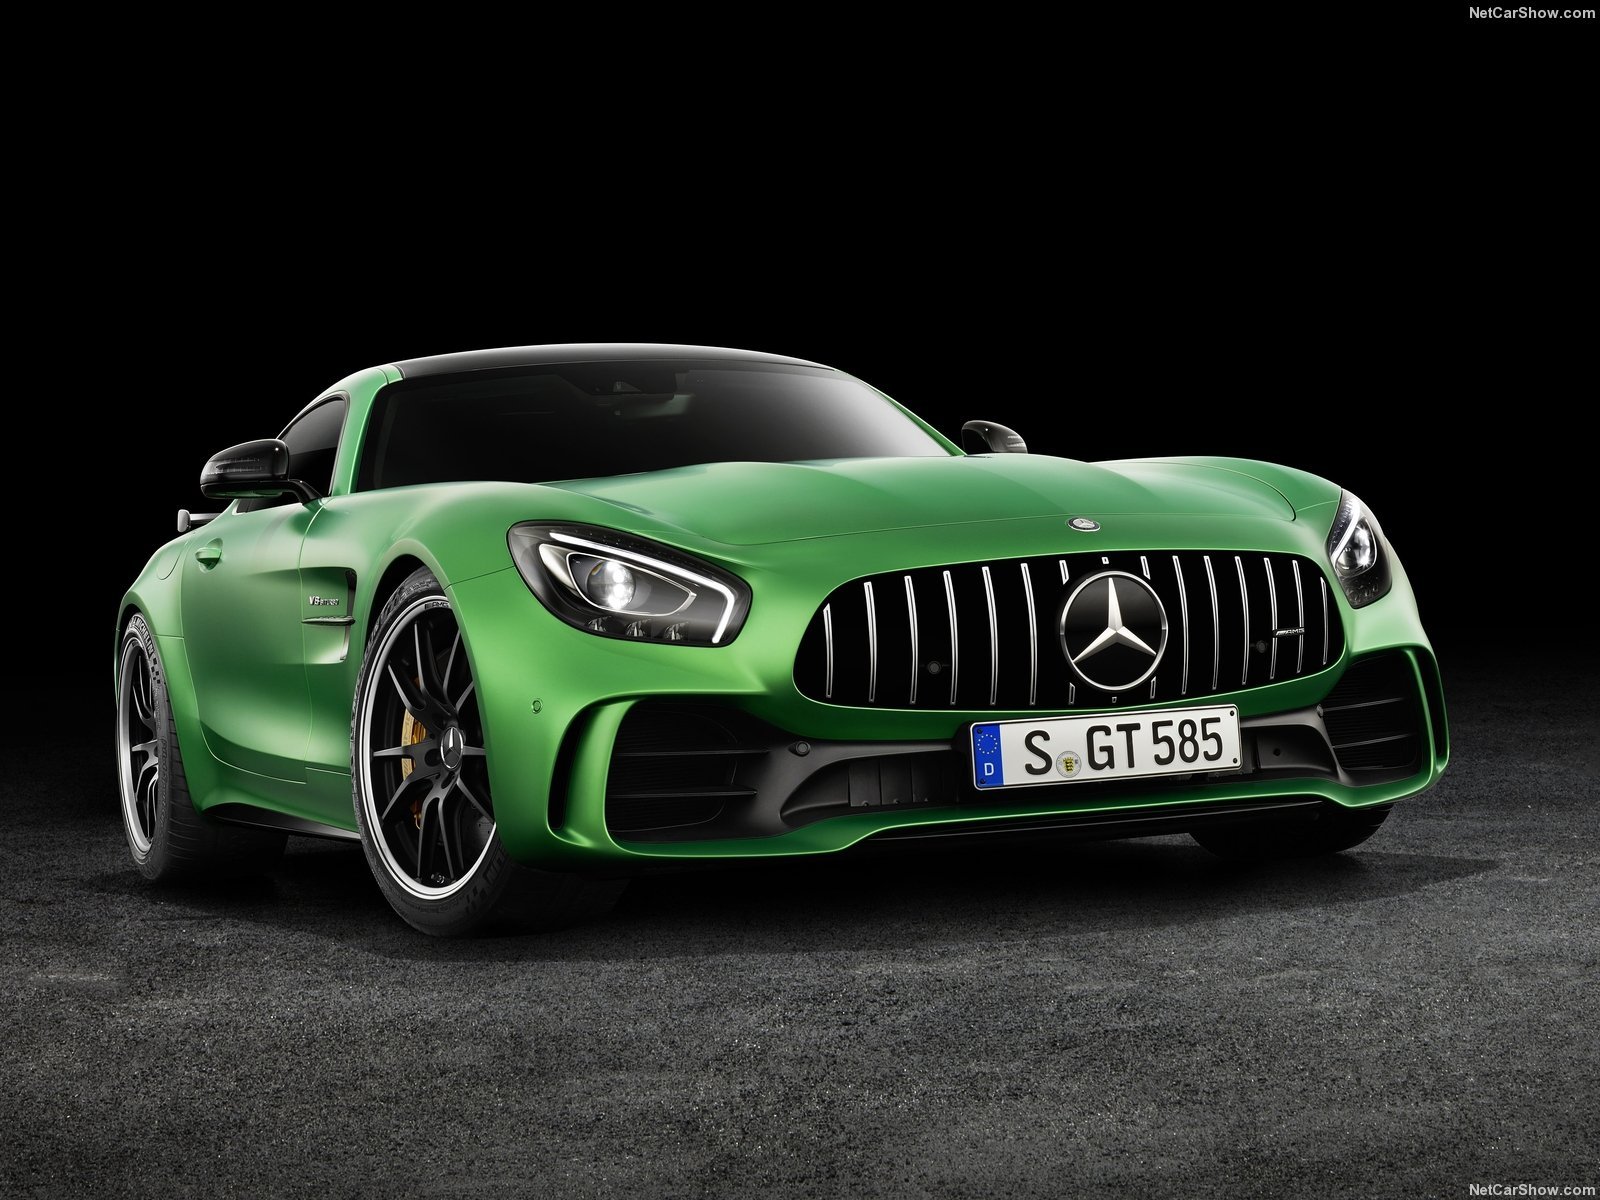 mercedes, Benz, Amg, Gt r, Cars, Coupe, Green, 2016 Wallpaper